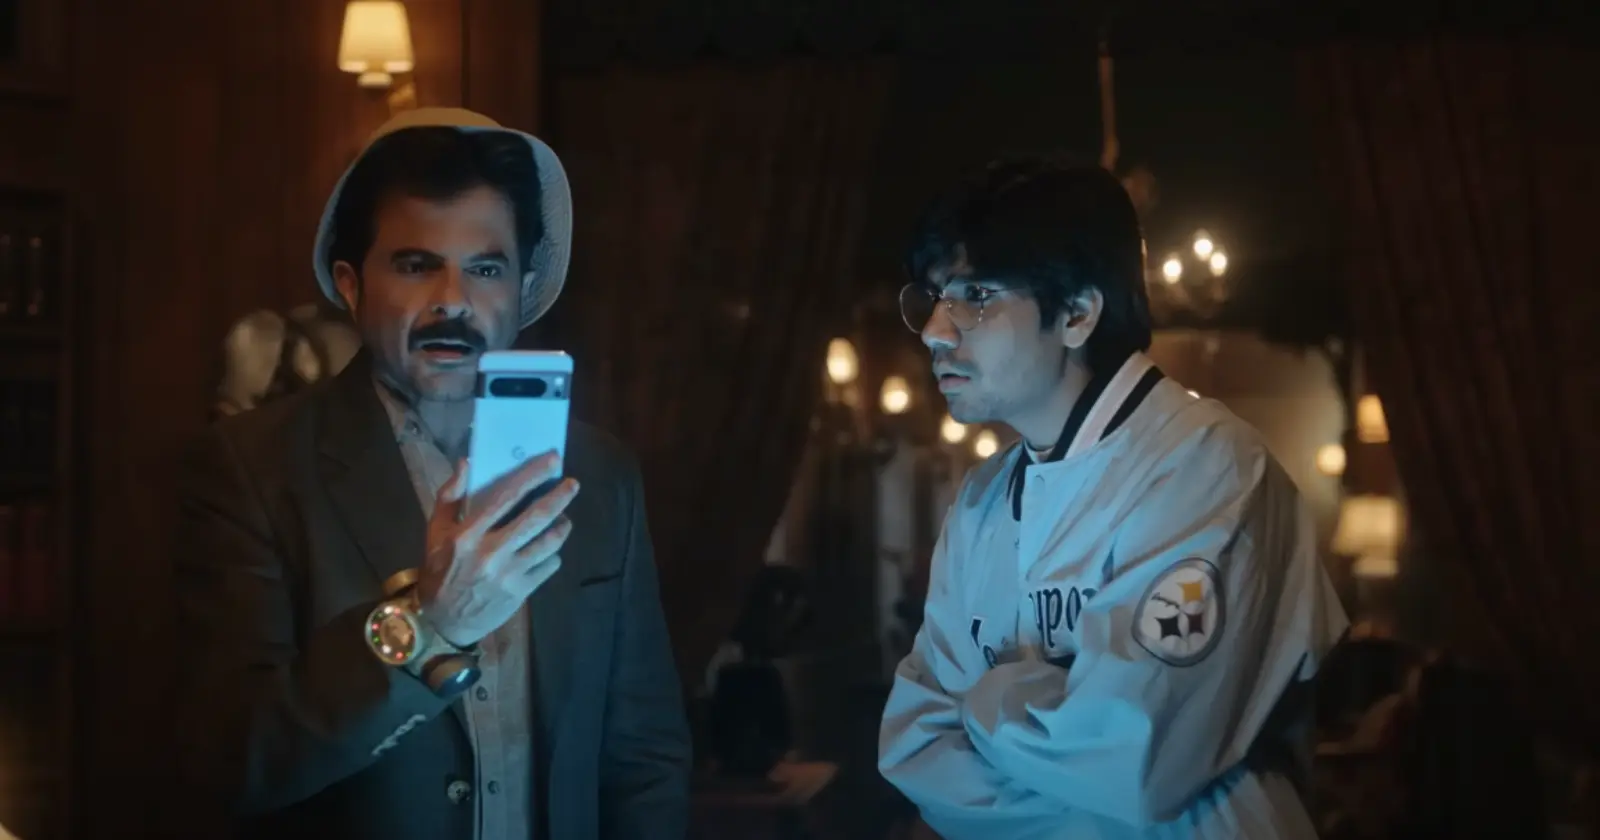 Google Pixel 8 Mr. India themed ad campaign goes full throttle